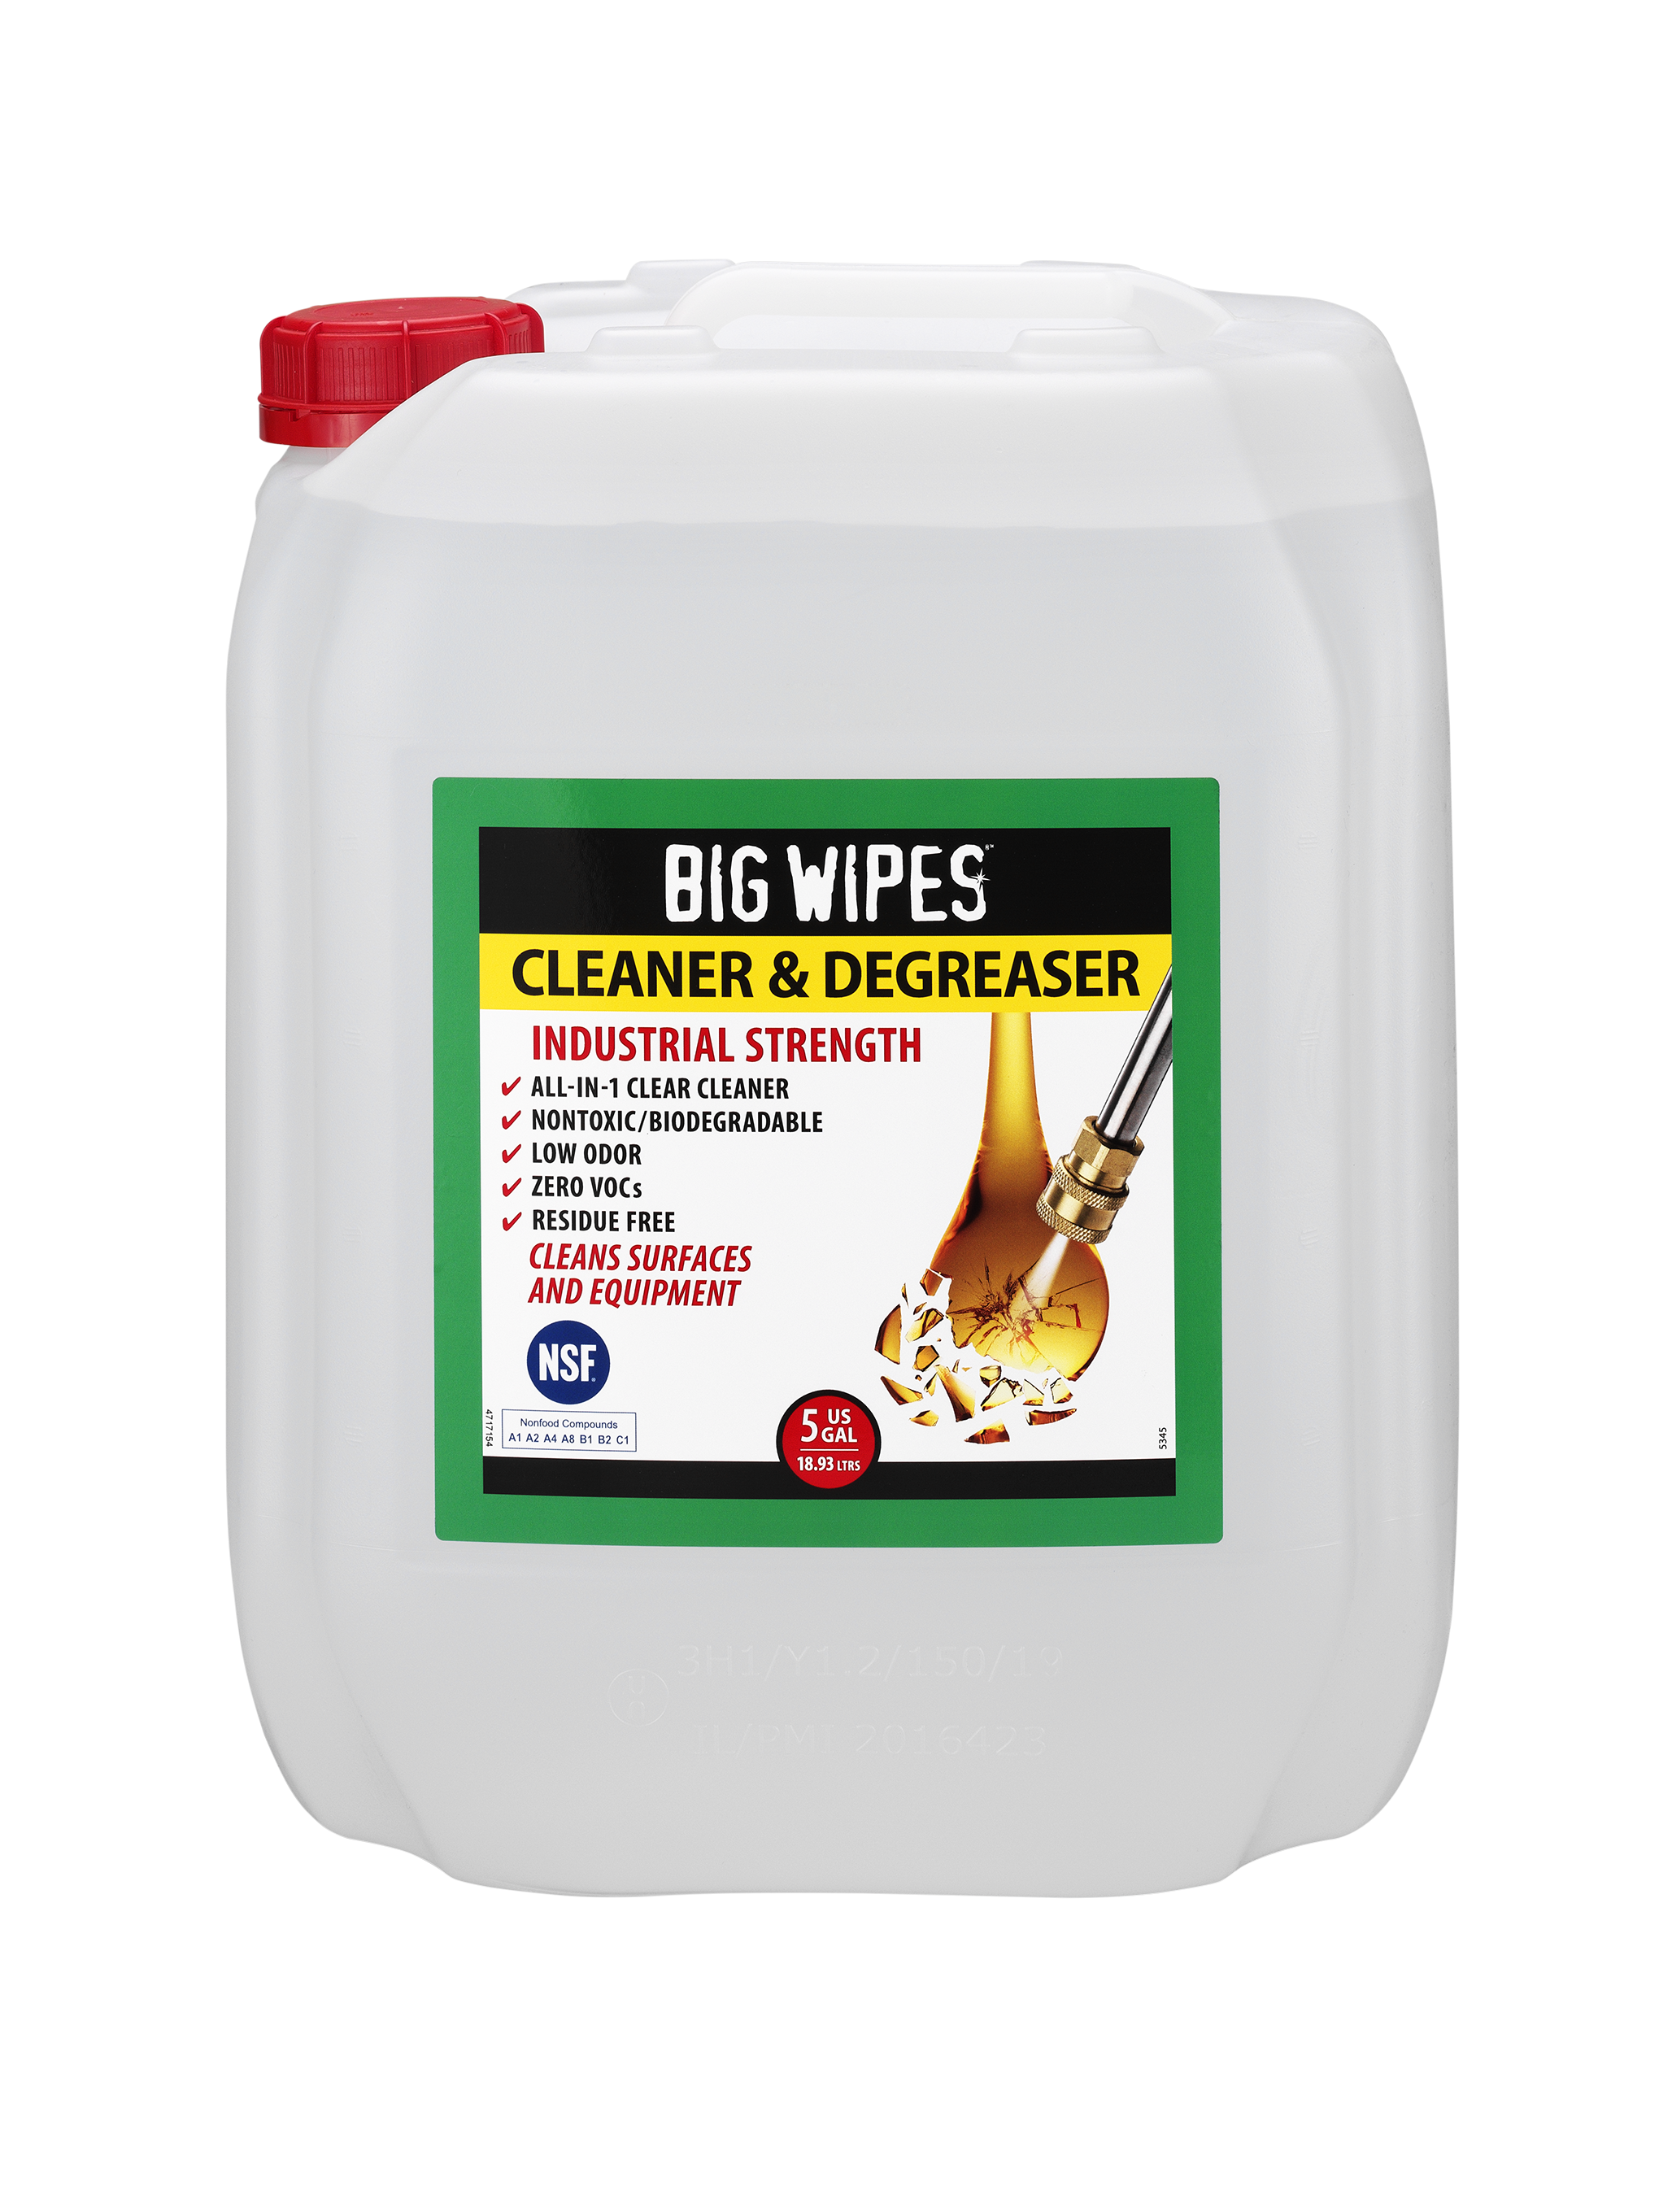 (Big Wipes) Cleaner & Degreaser – 5 gal.